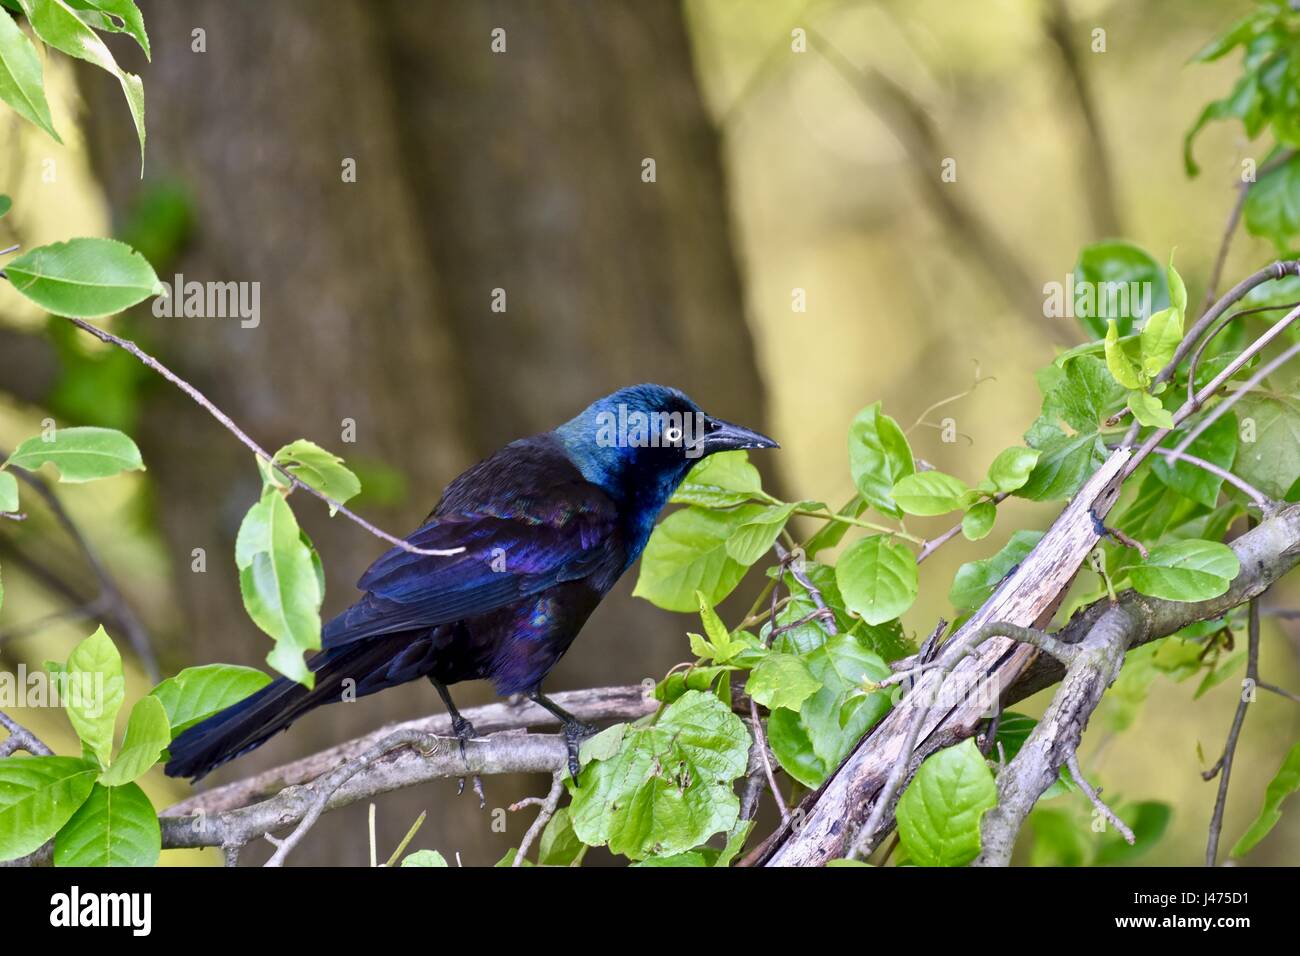 Common grackle (Quiscalus quiscula) percged on a branch Stock Photo